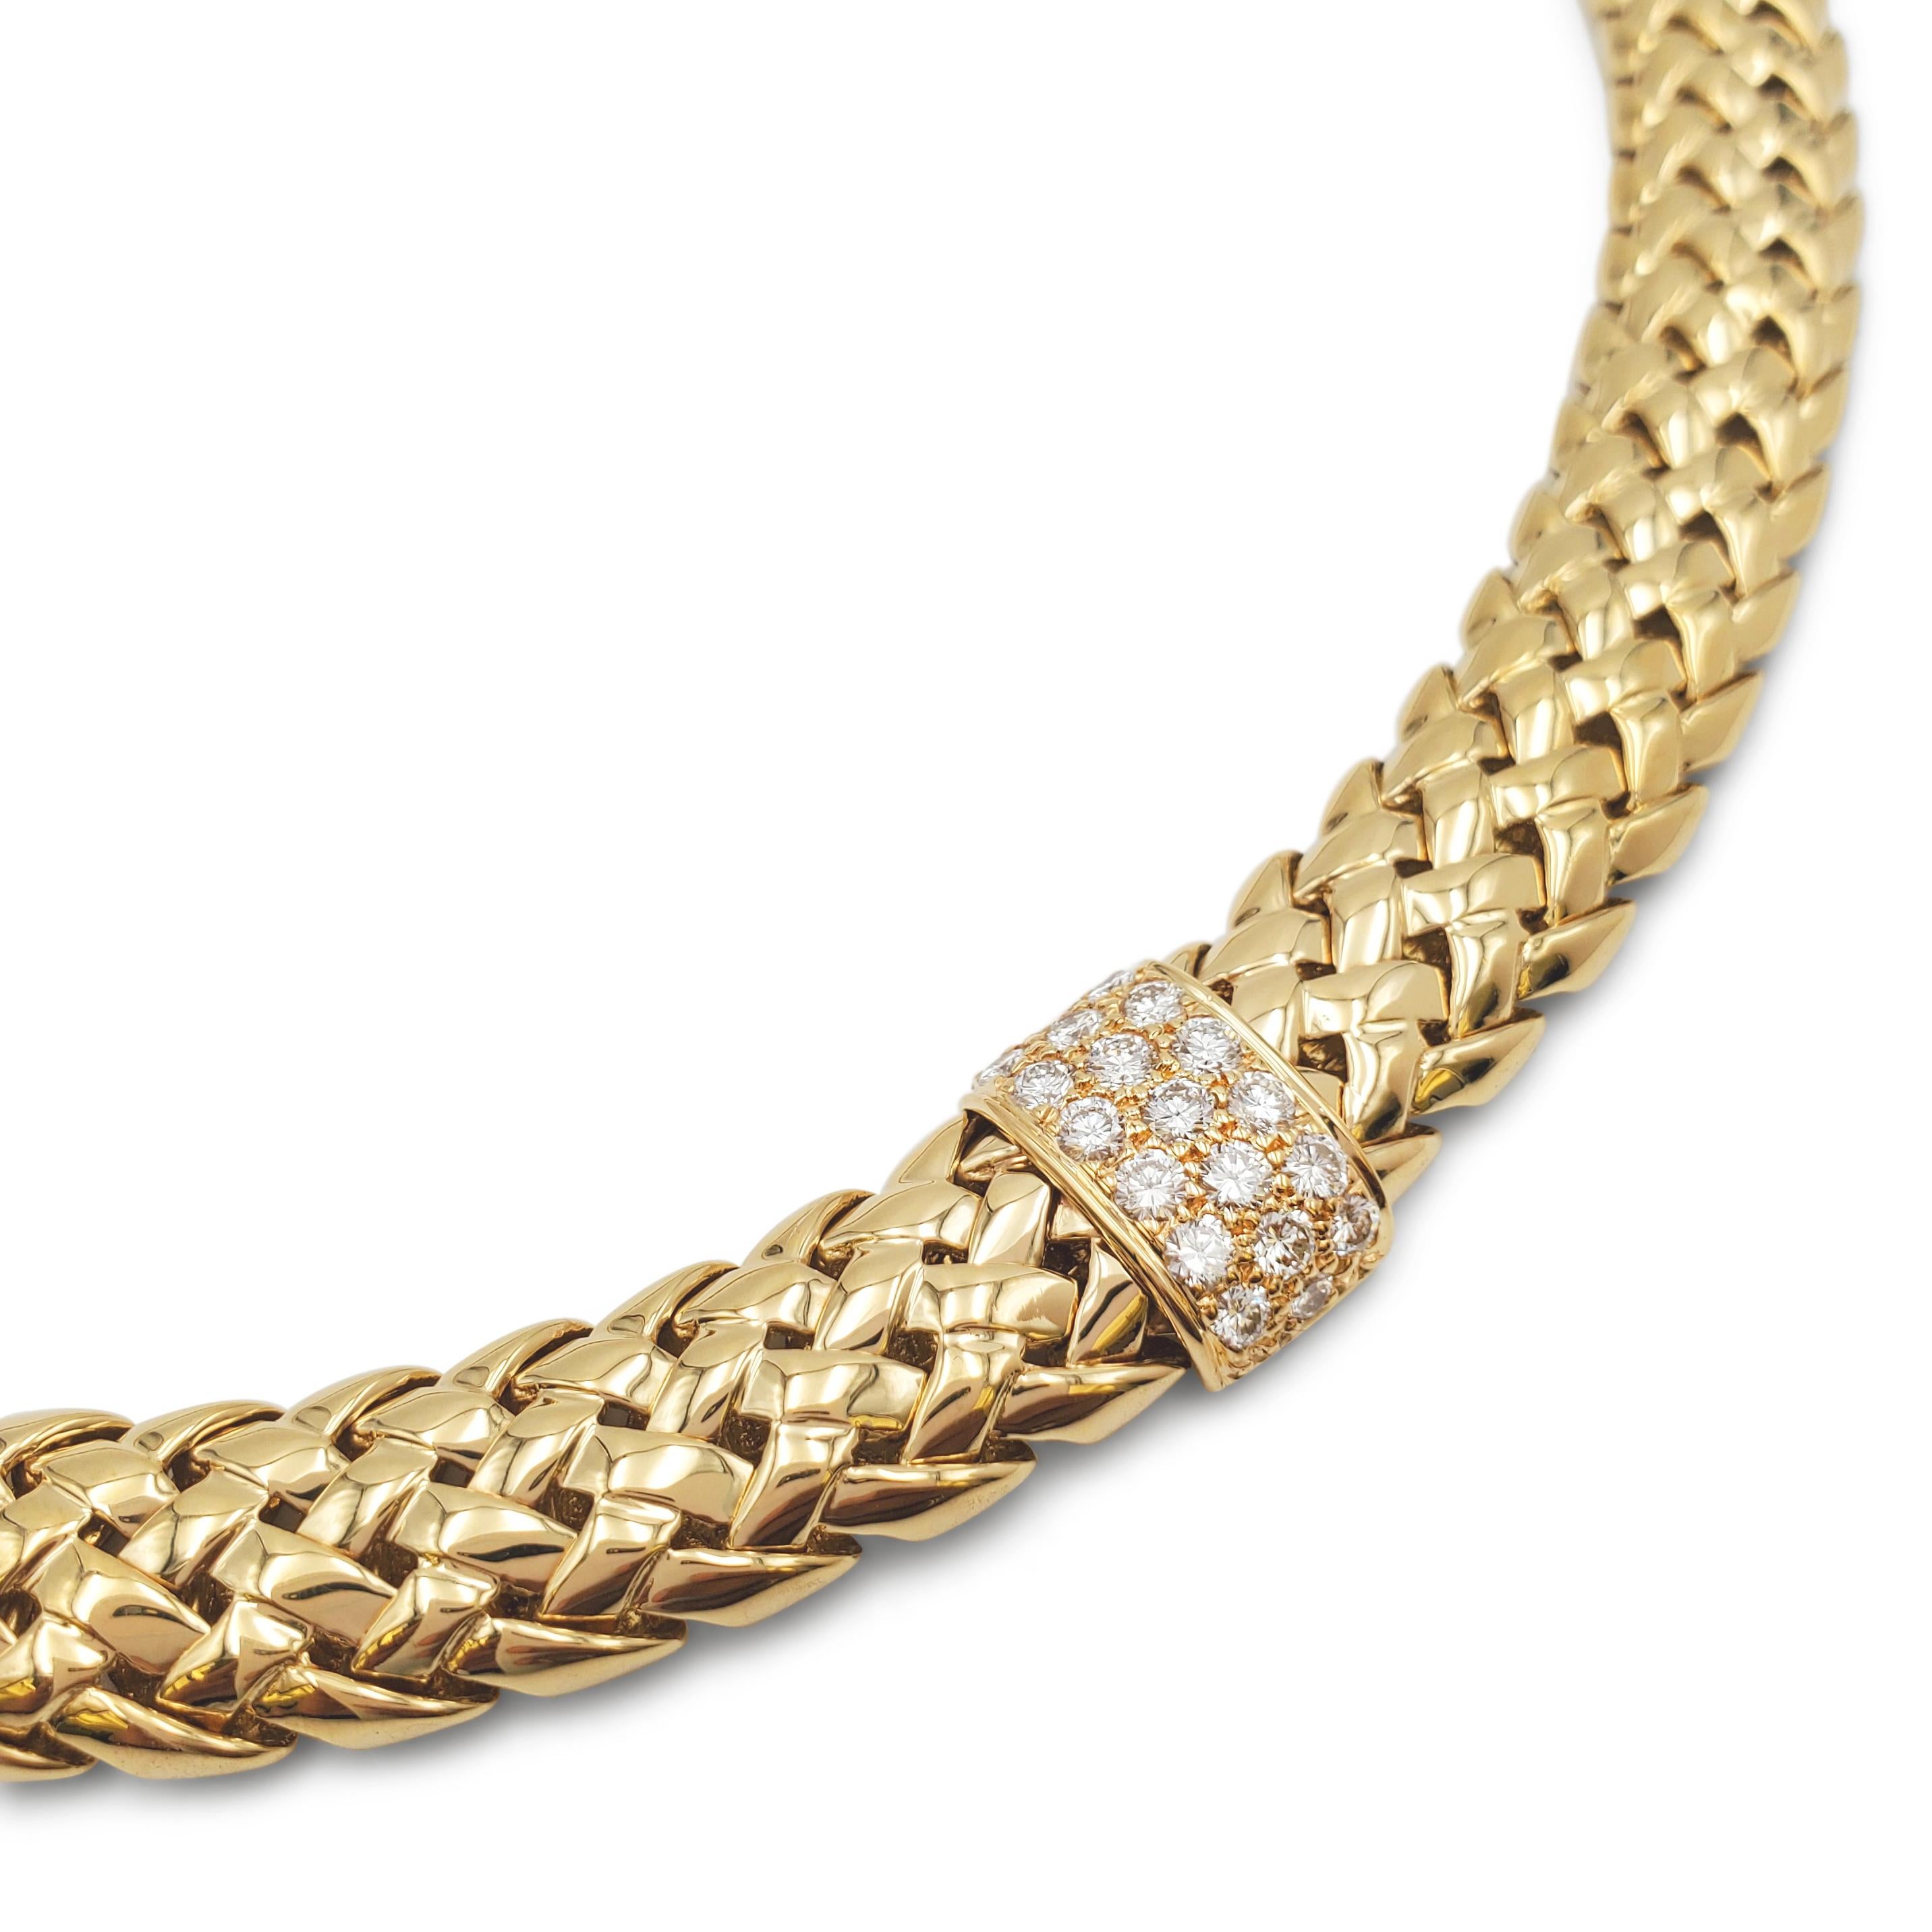 Women's Tiffany & Co. 'Vannerie' Gold and Diamond Necklace